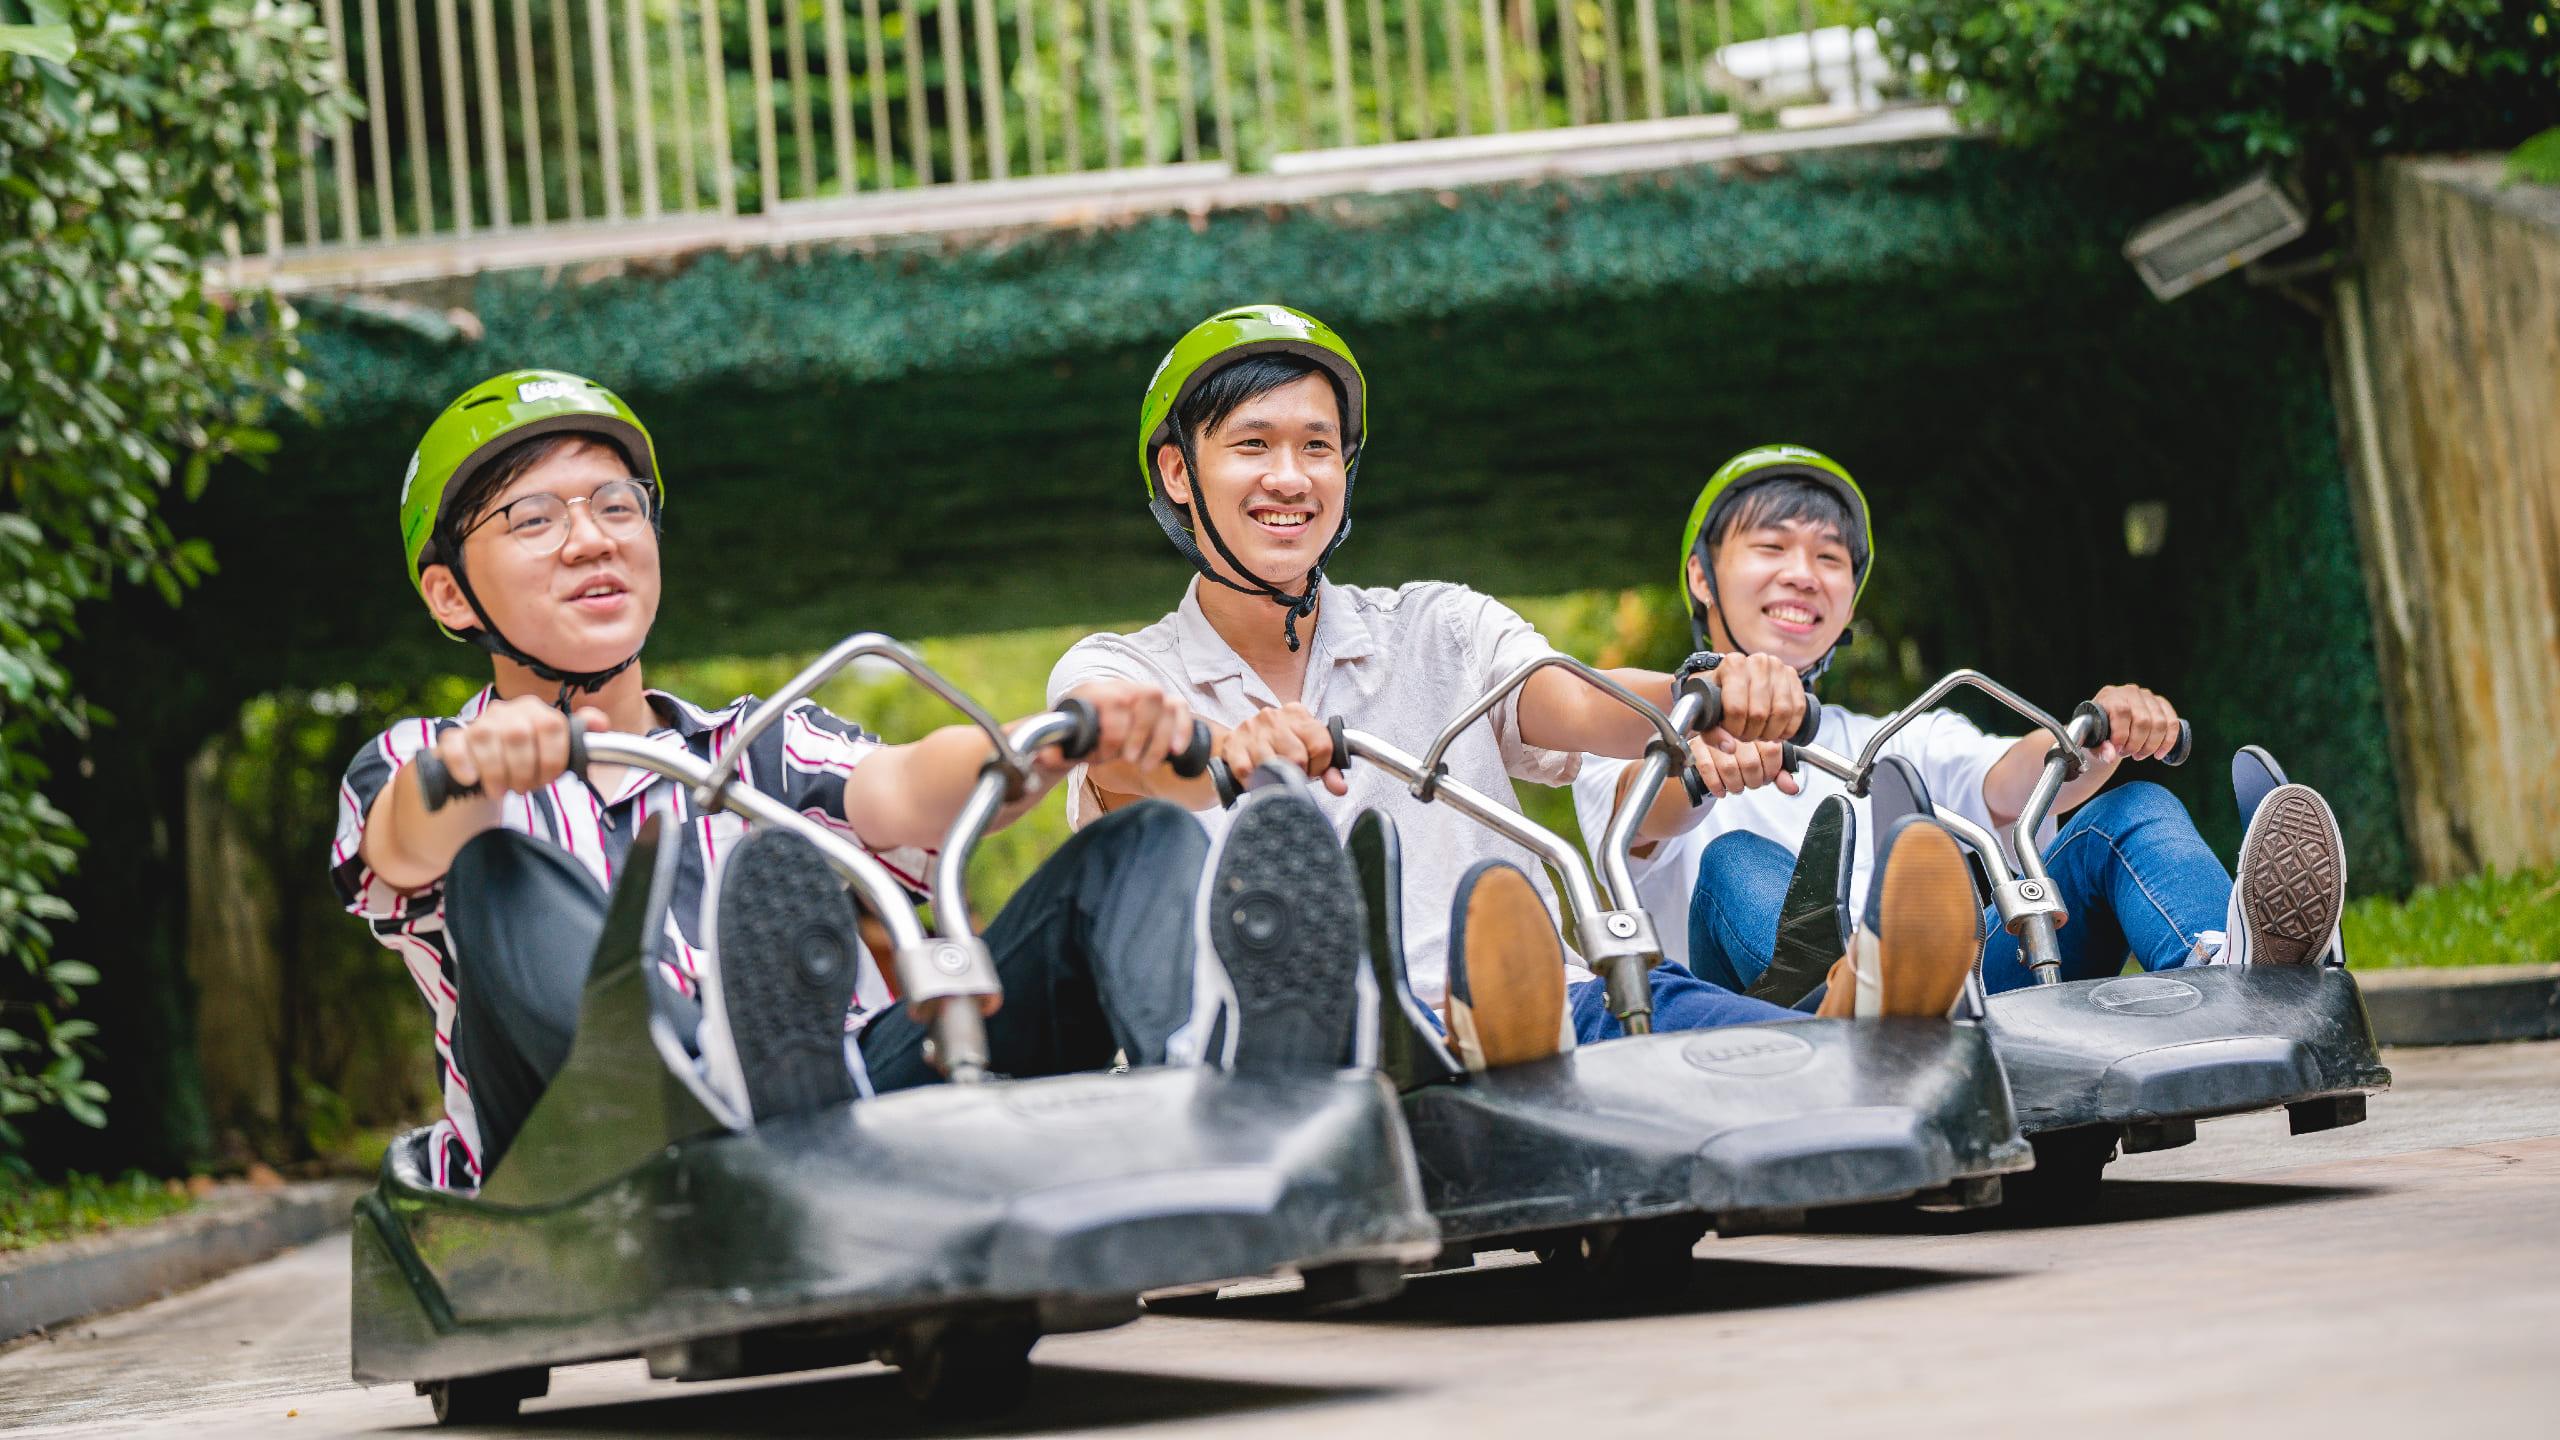 Three friends ride next to each other on the Luge at Singapore.